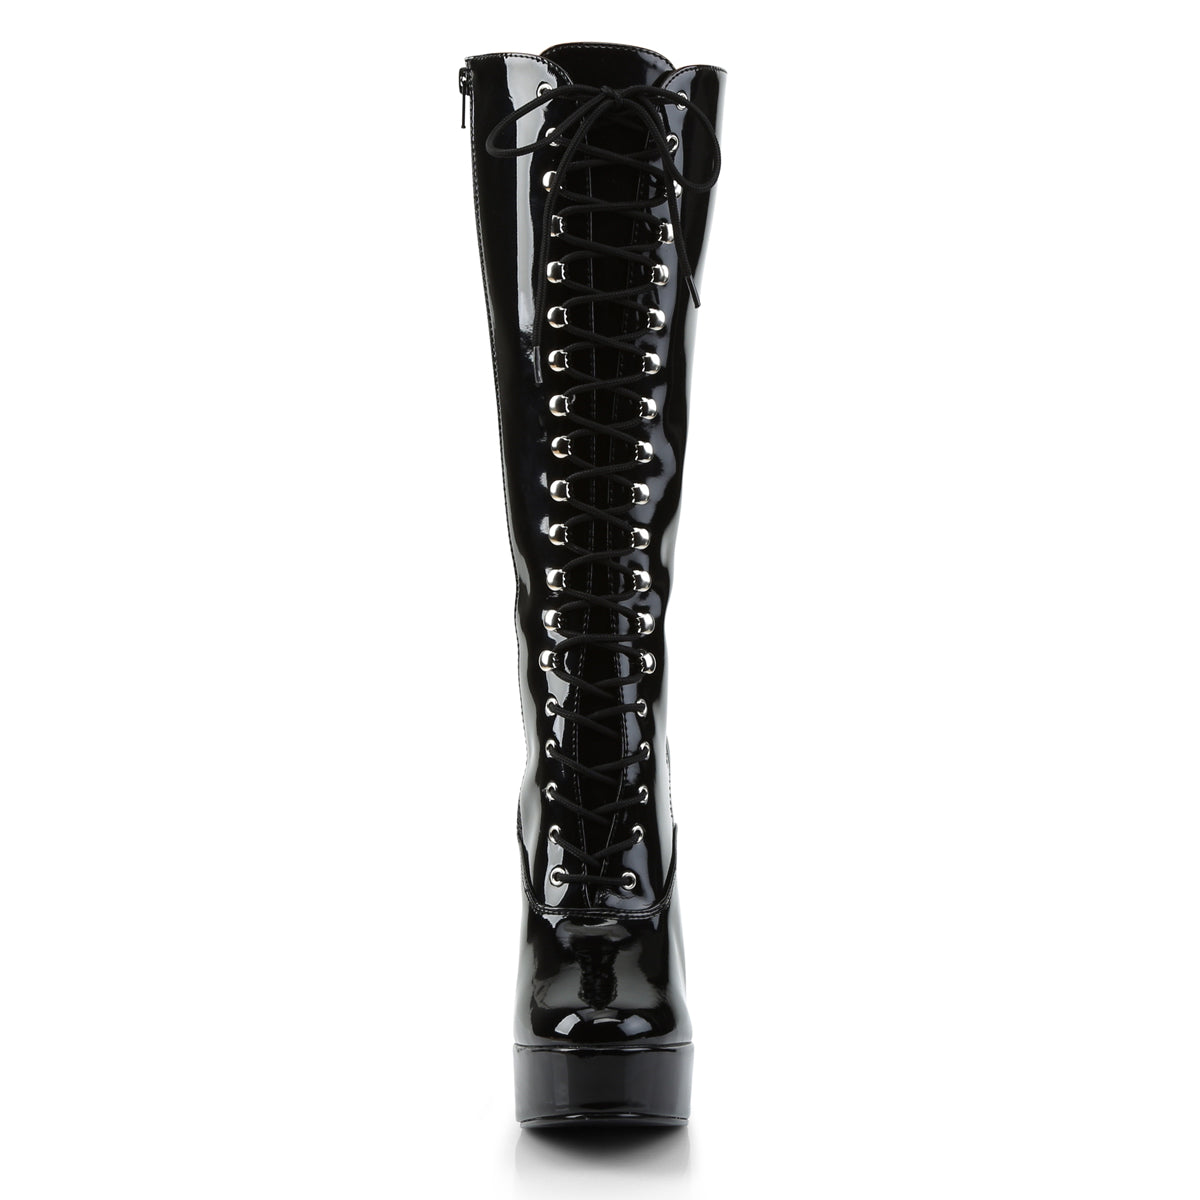 Sexy Electra Knee High Boots Black PA